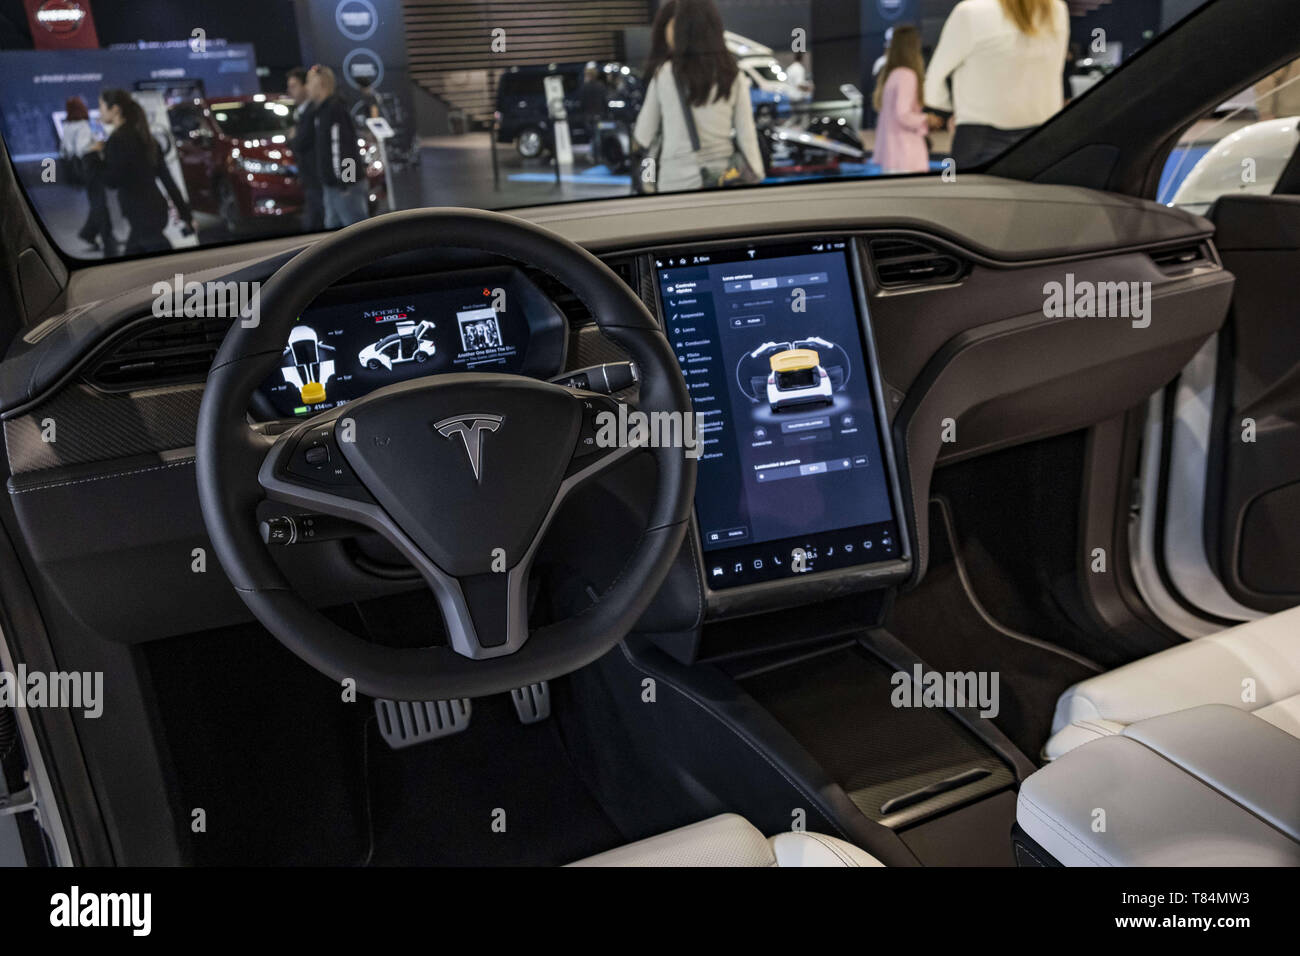 May 10, 2019 - Barcelona, Catalonia, Spain - Interior of the model X vehicle of the car manufacturer Tesla seen during the event..The Automobile Barcelona trade fair celebrates 100 years. The event takes place from 9 to 19 May at the MontjuÃ¯c fairgrounds. With more than 150,000 square meters and 45 brands, the fair shows the latest vehicle models as well as the latest technologies applied to driving. (Credit Image: © Paco Freire/SOPA Images via ZUMA Wire) Stock Photo